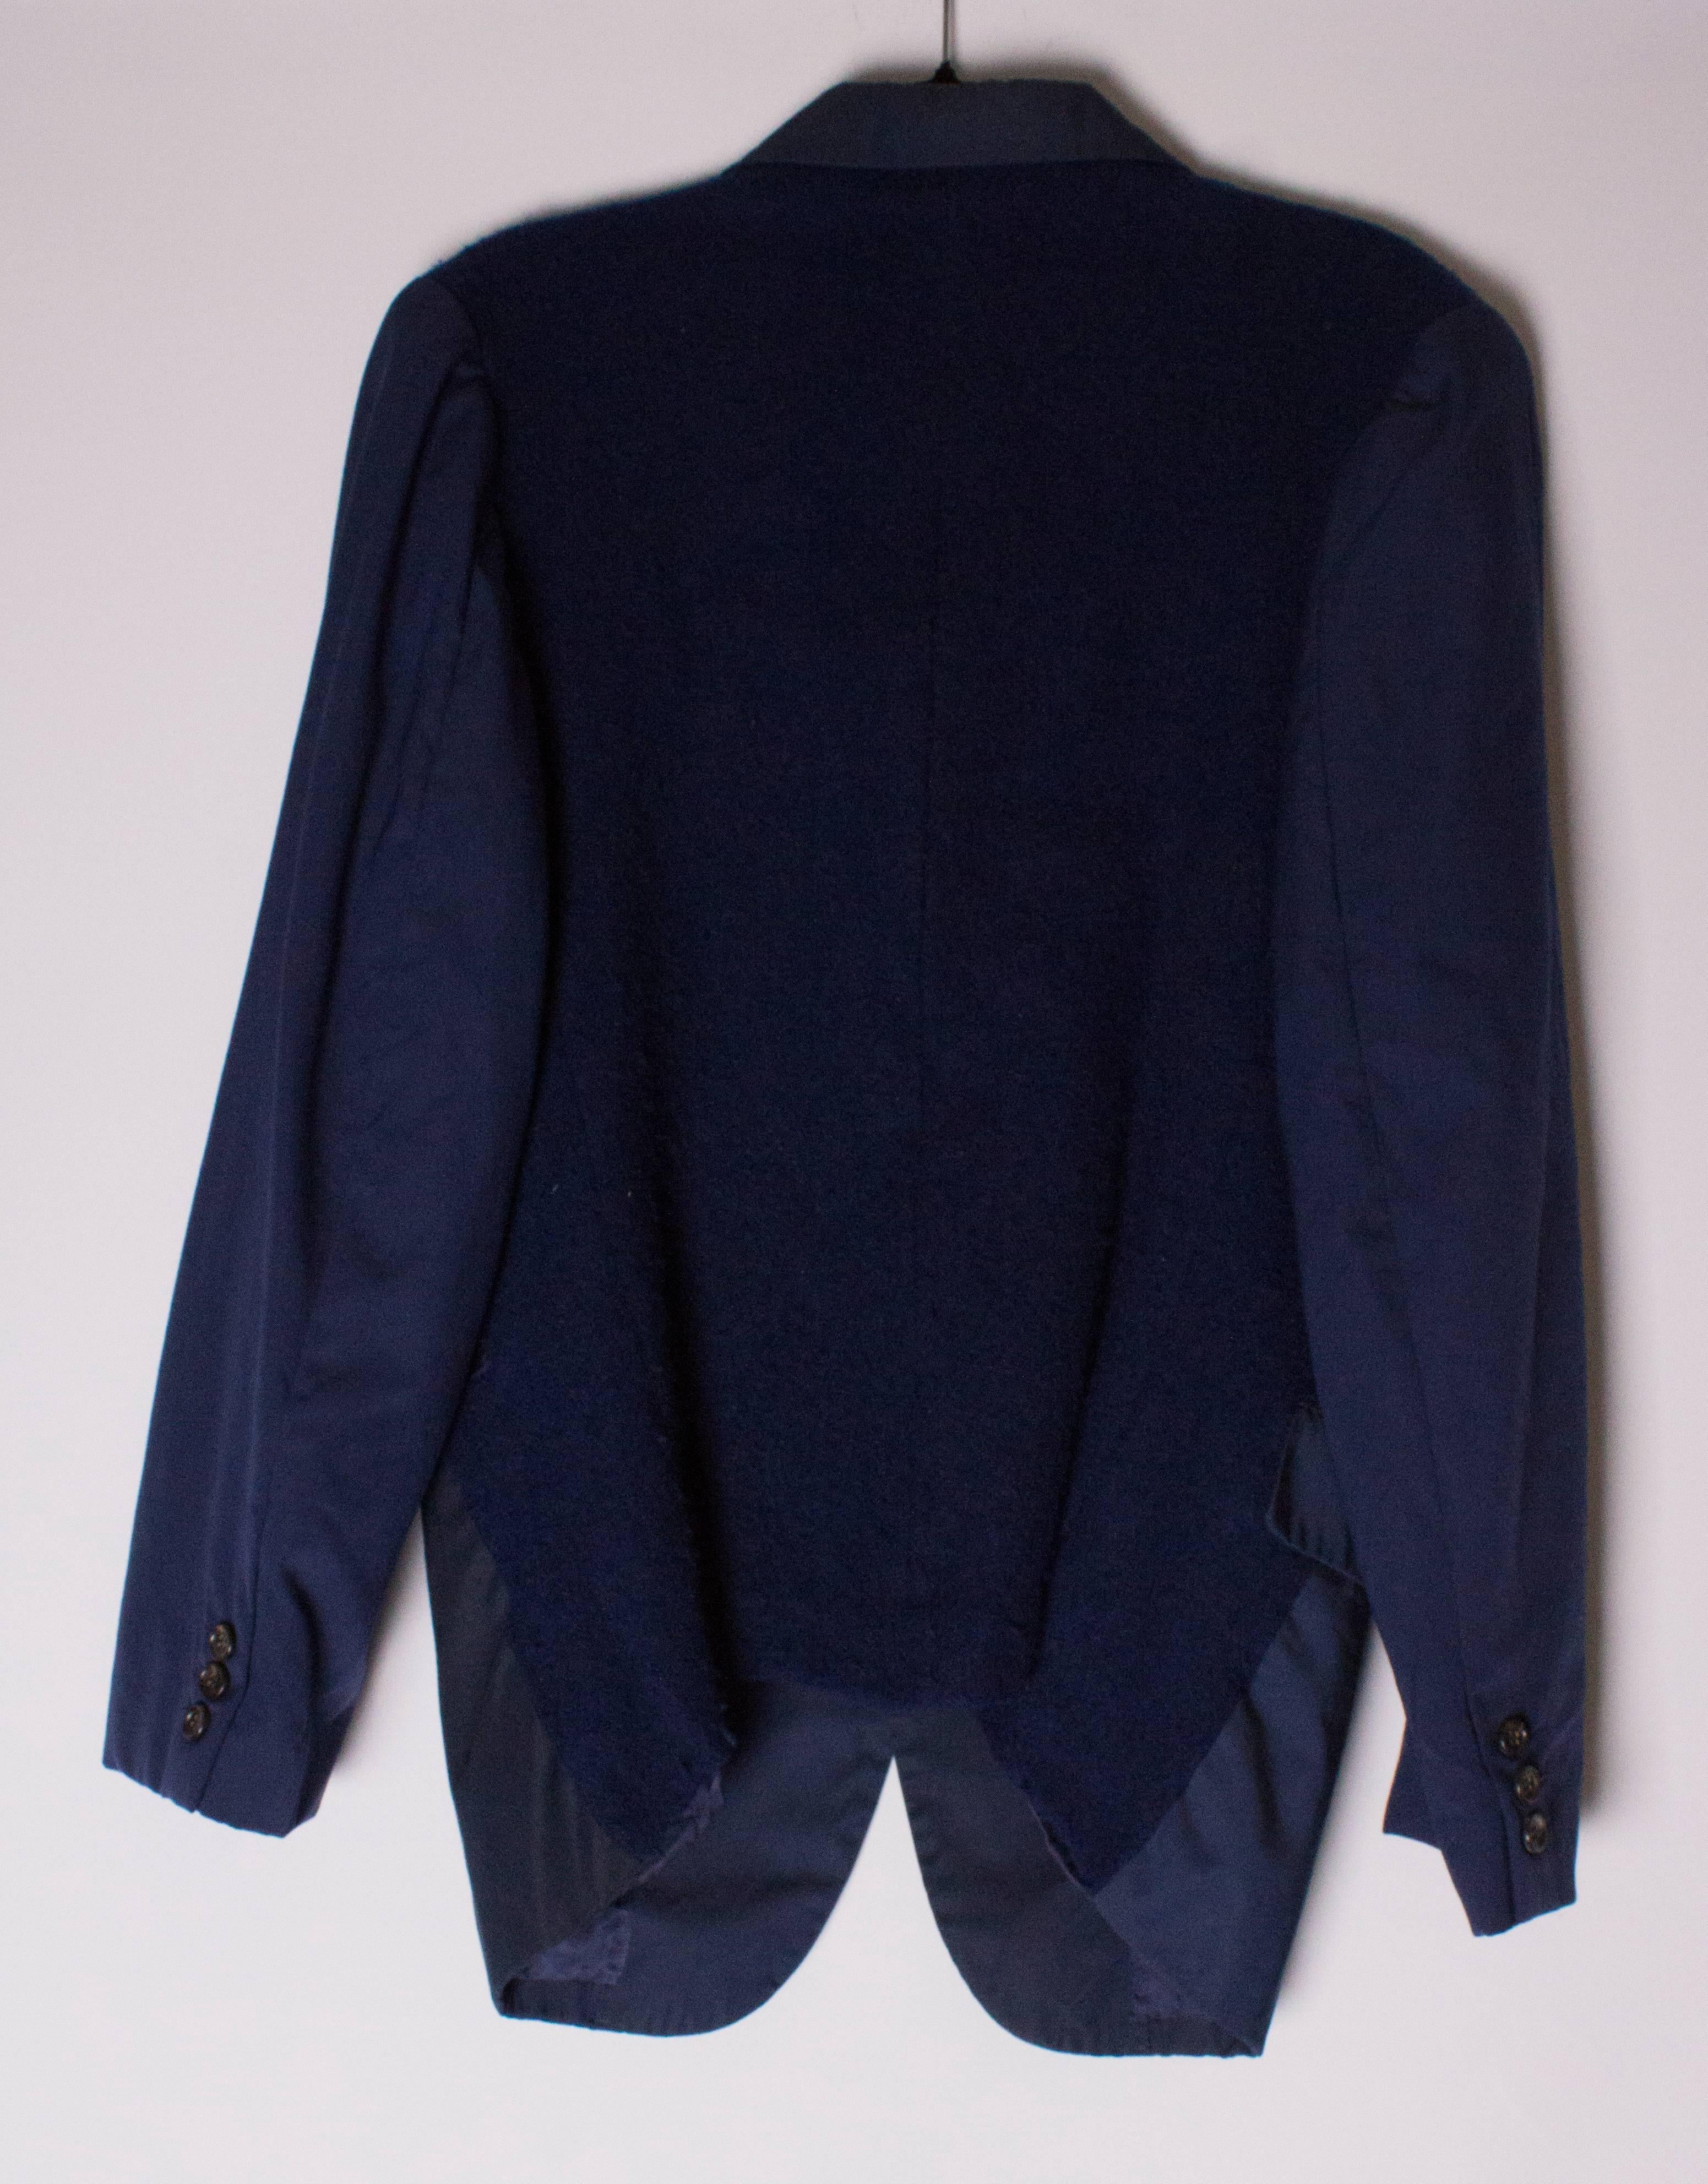 A great navy blue jacket by Comme des Garcons,  Homme Plus range.
The main part of the jacket is wool , and the back is a boucle like fabric.The back is unlined and the front of the jacket lined.  It has one chest pocket and two waist pockets.
